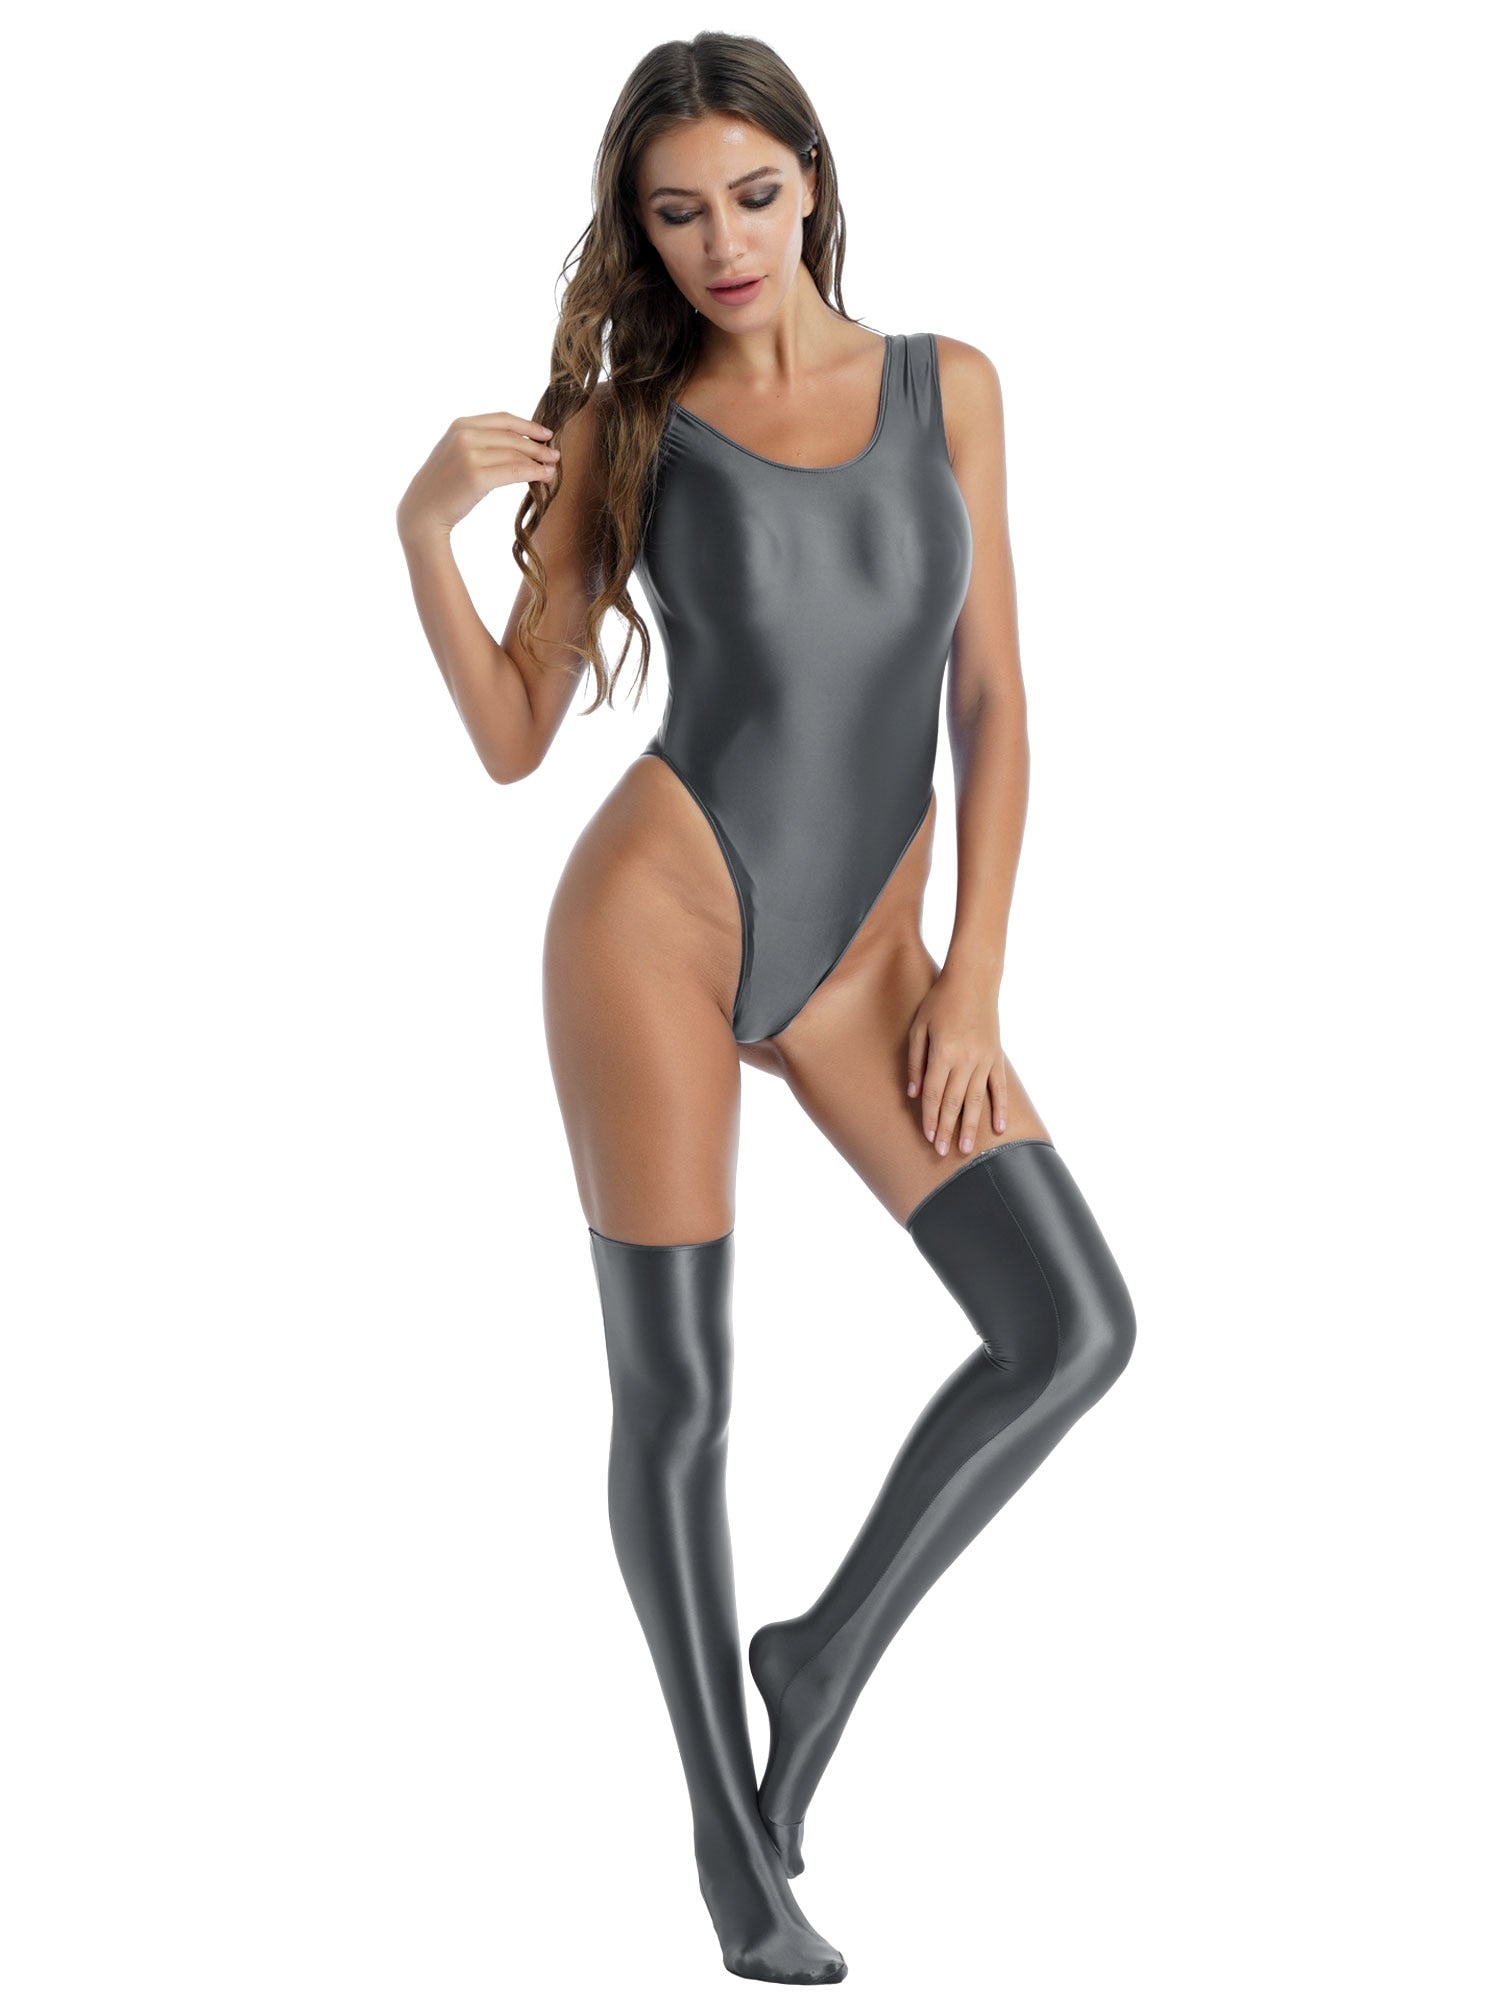 Women's Glossy Stretchy Swimming Suit Swimwear Swimsuit Sleeveless High Cut Slim Fit Bodysuit with Stocking Outfits Clubwear The Clothing Company Sydney